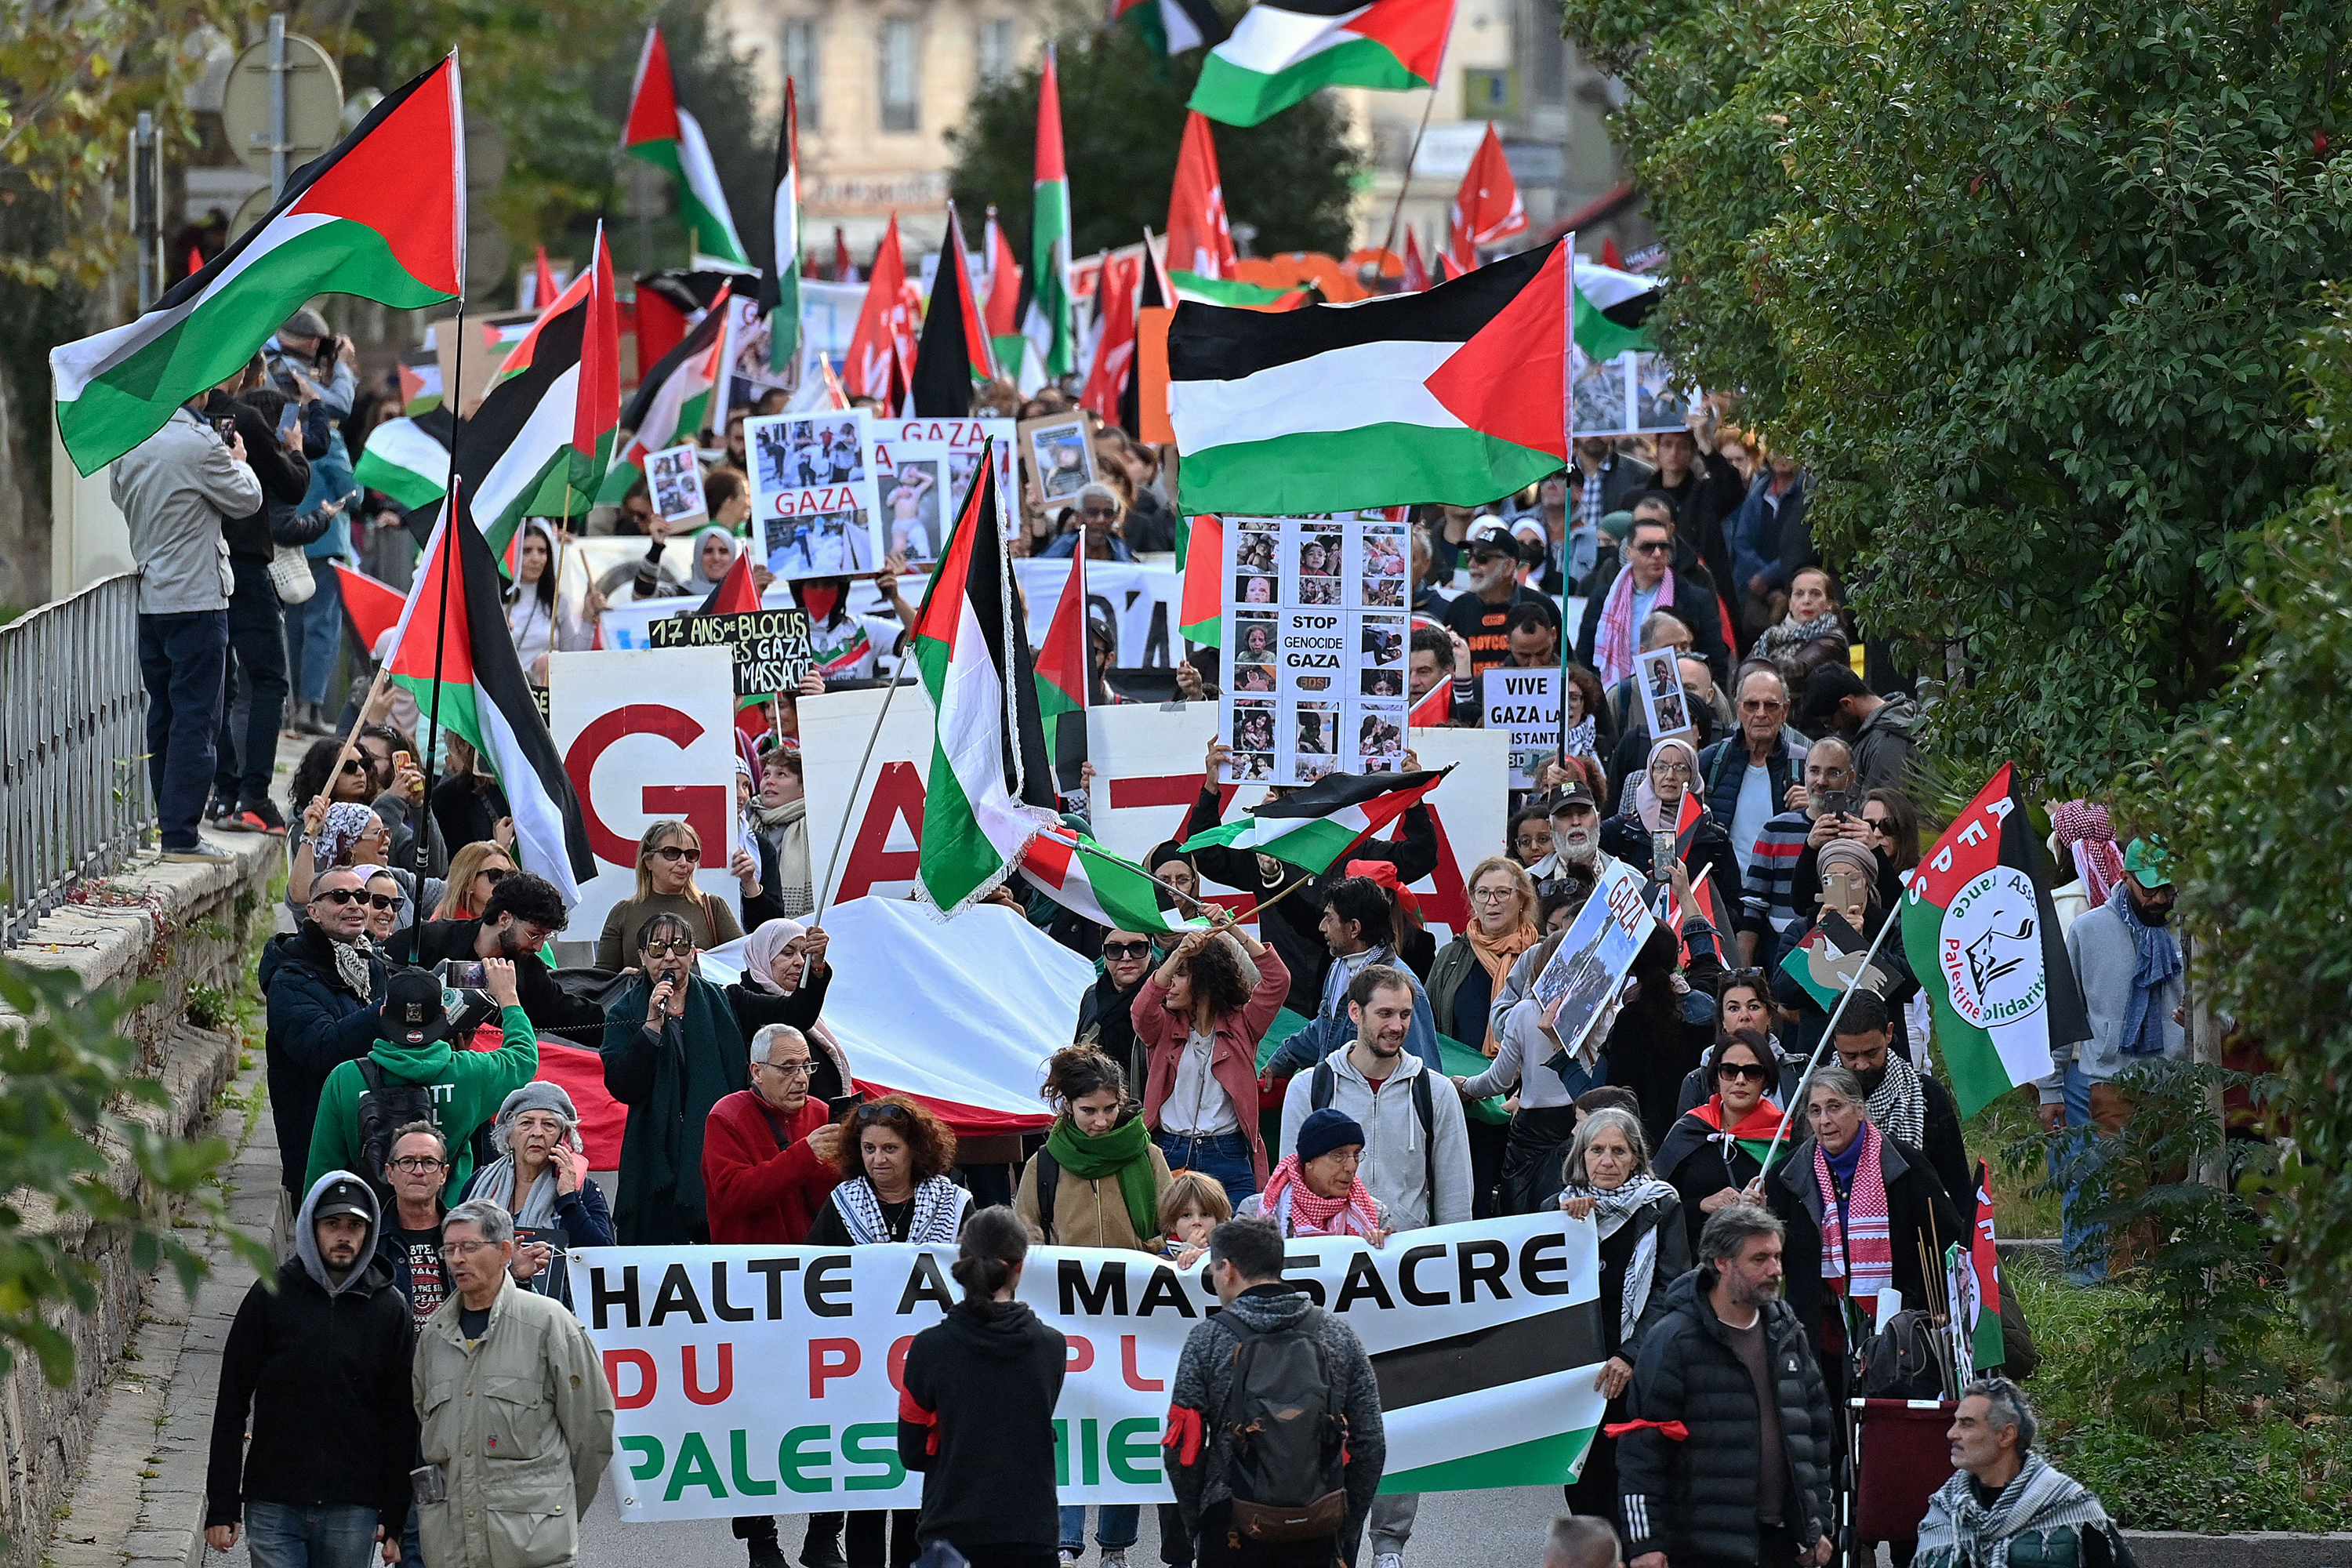 Protesters wave Palestinian flags as they take part in a demonstration to demand a "stop to the bombings in Gaza" in Montpellier, southern France on November 18.